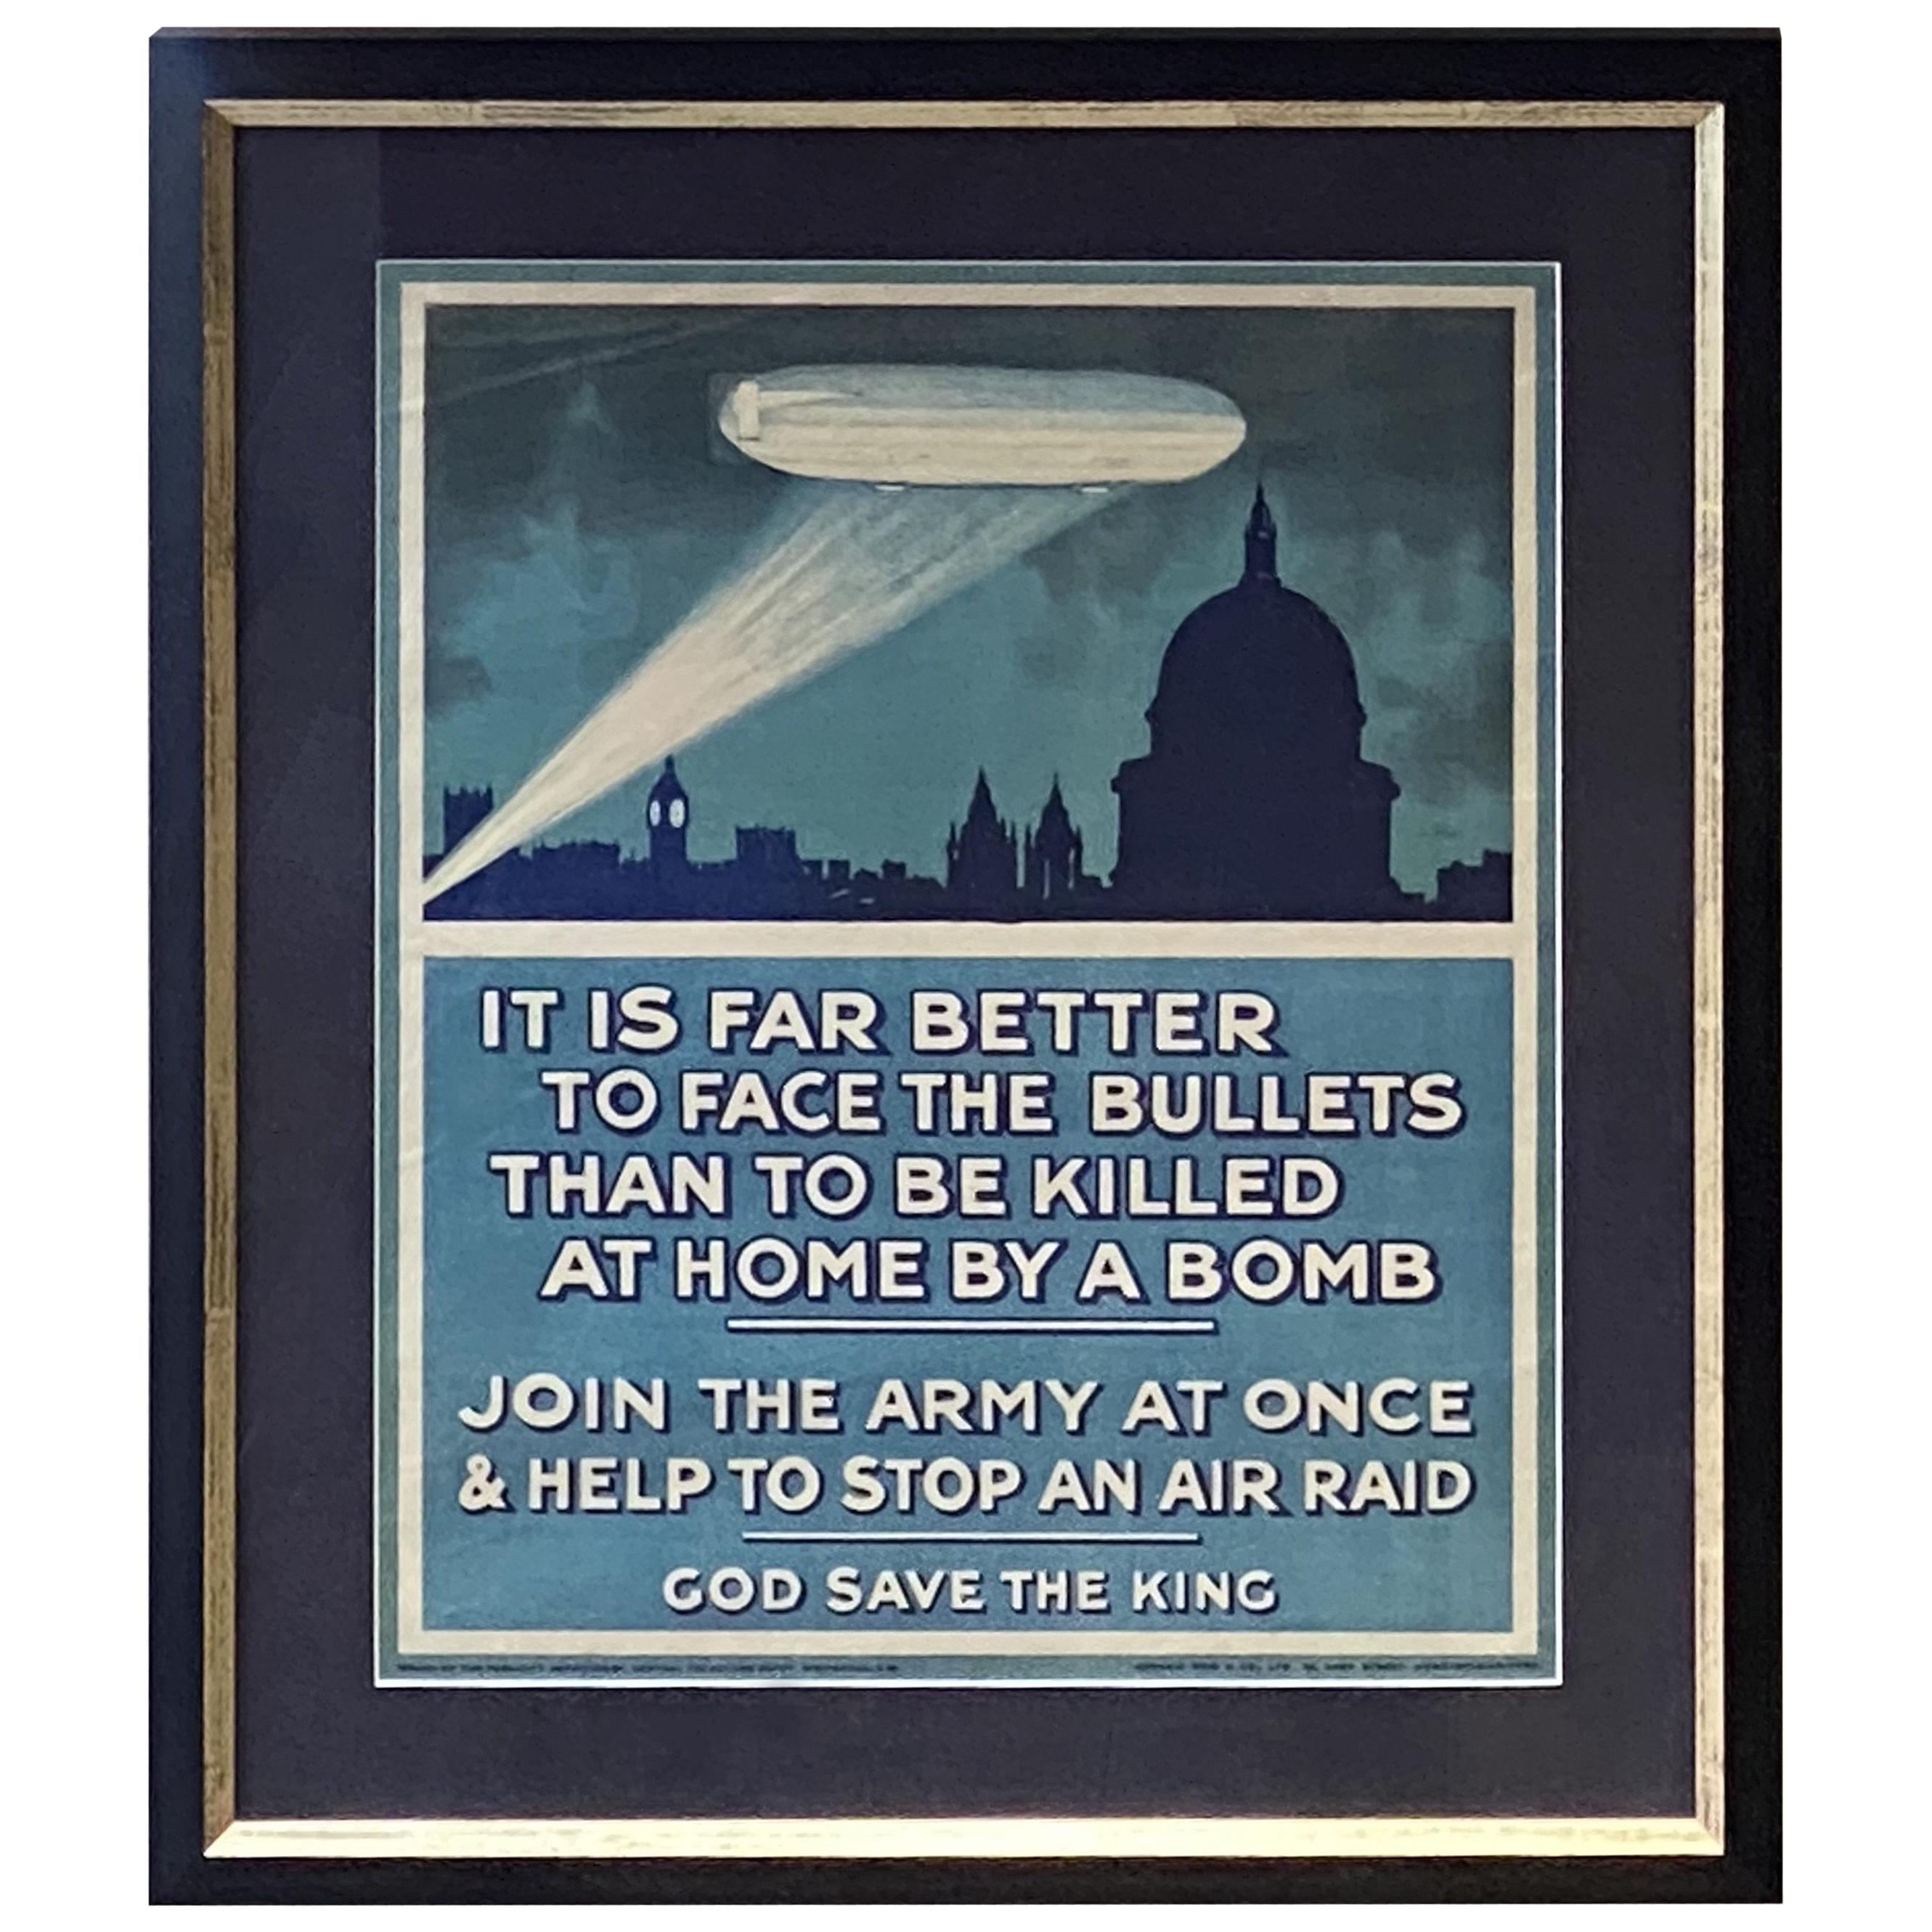 "Join the Army at Once & Help to Stop an Air Raid" Vintage British WWI Poster